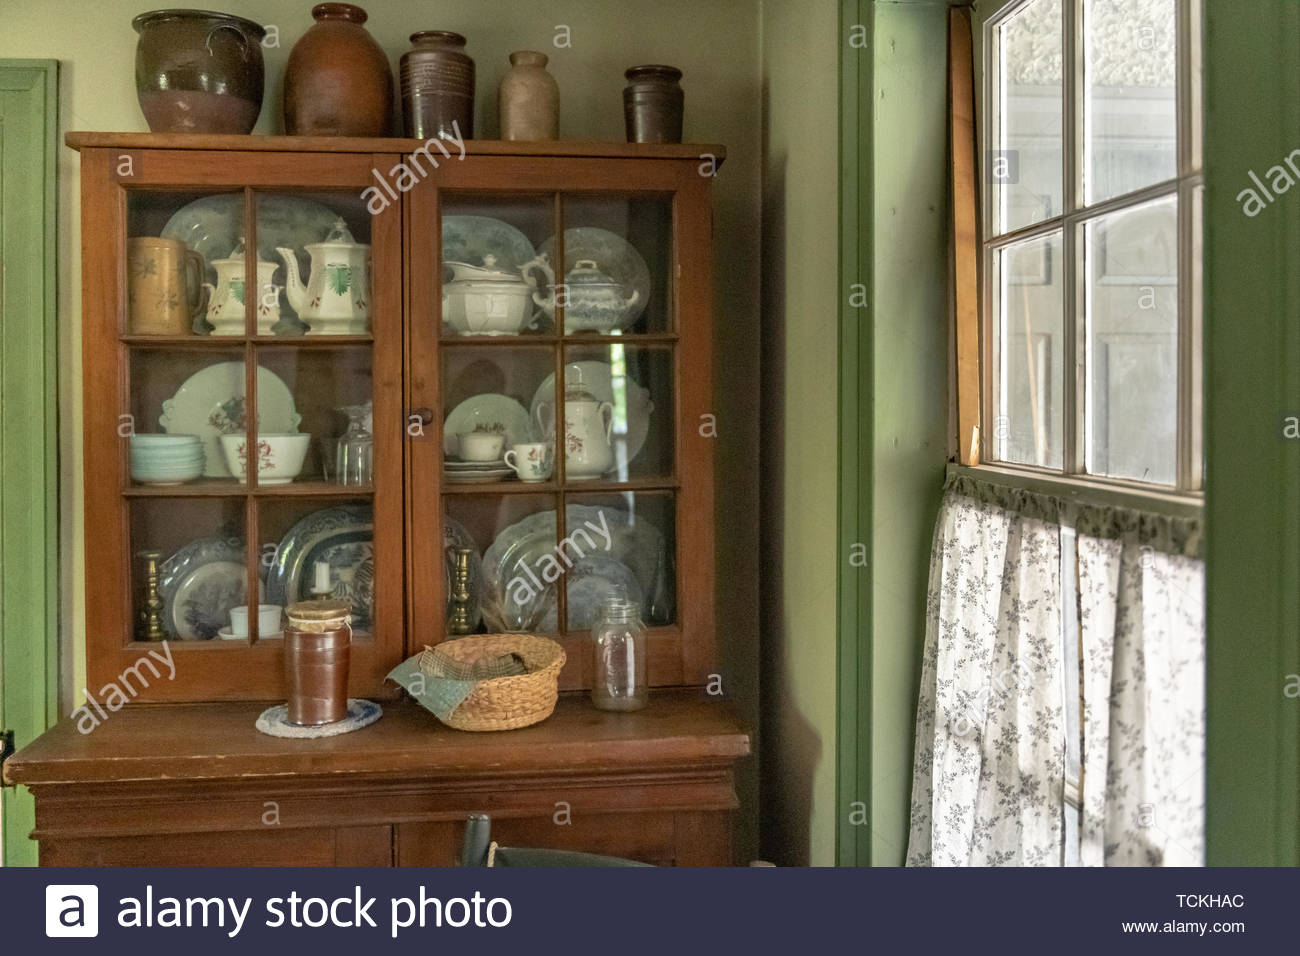 Toronto Canada May 30 2019 Antique Wood Cabinet With Glassware